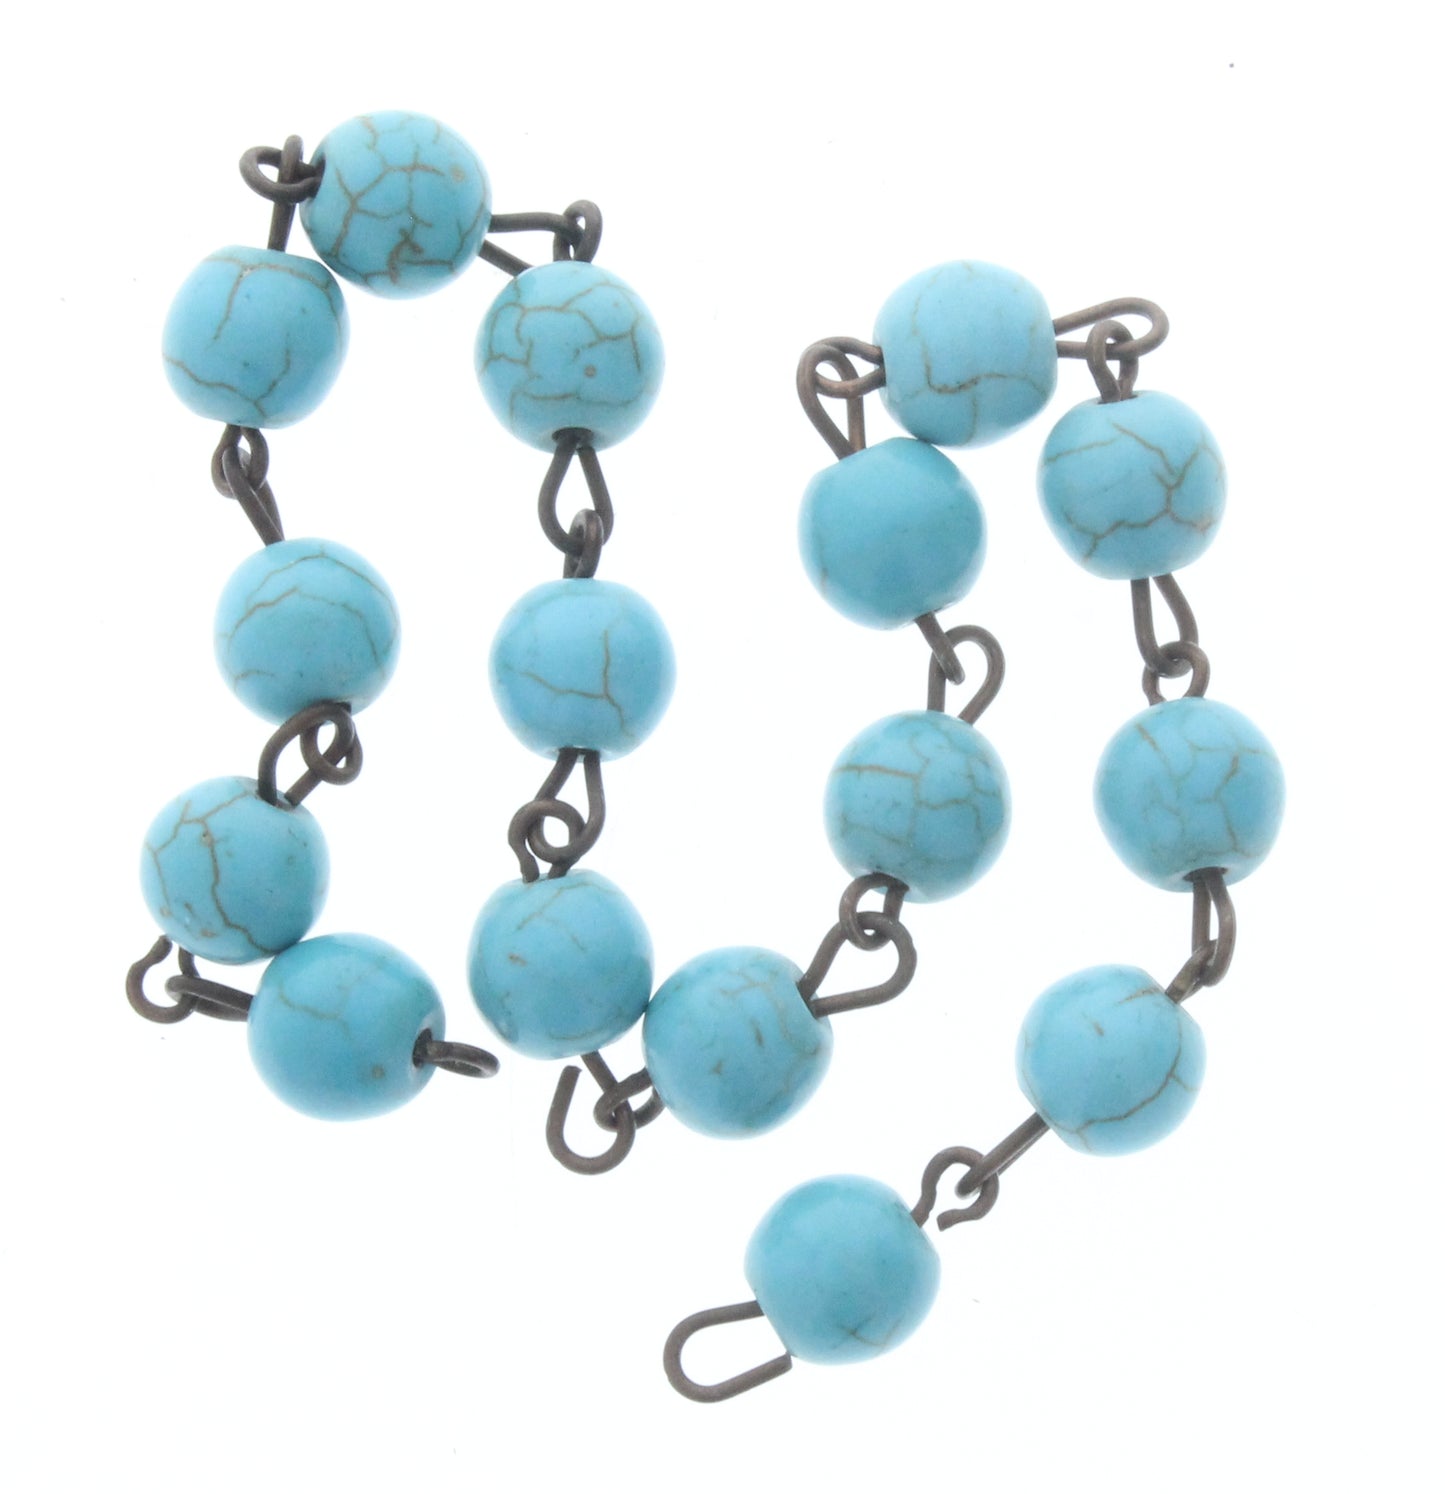 8mm Turquoise Linked Chain, Sold by Foot